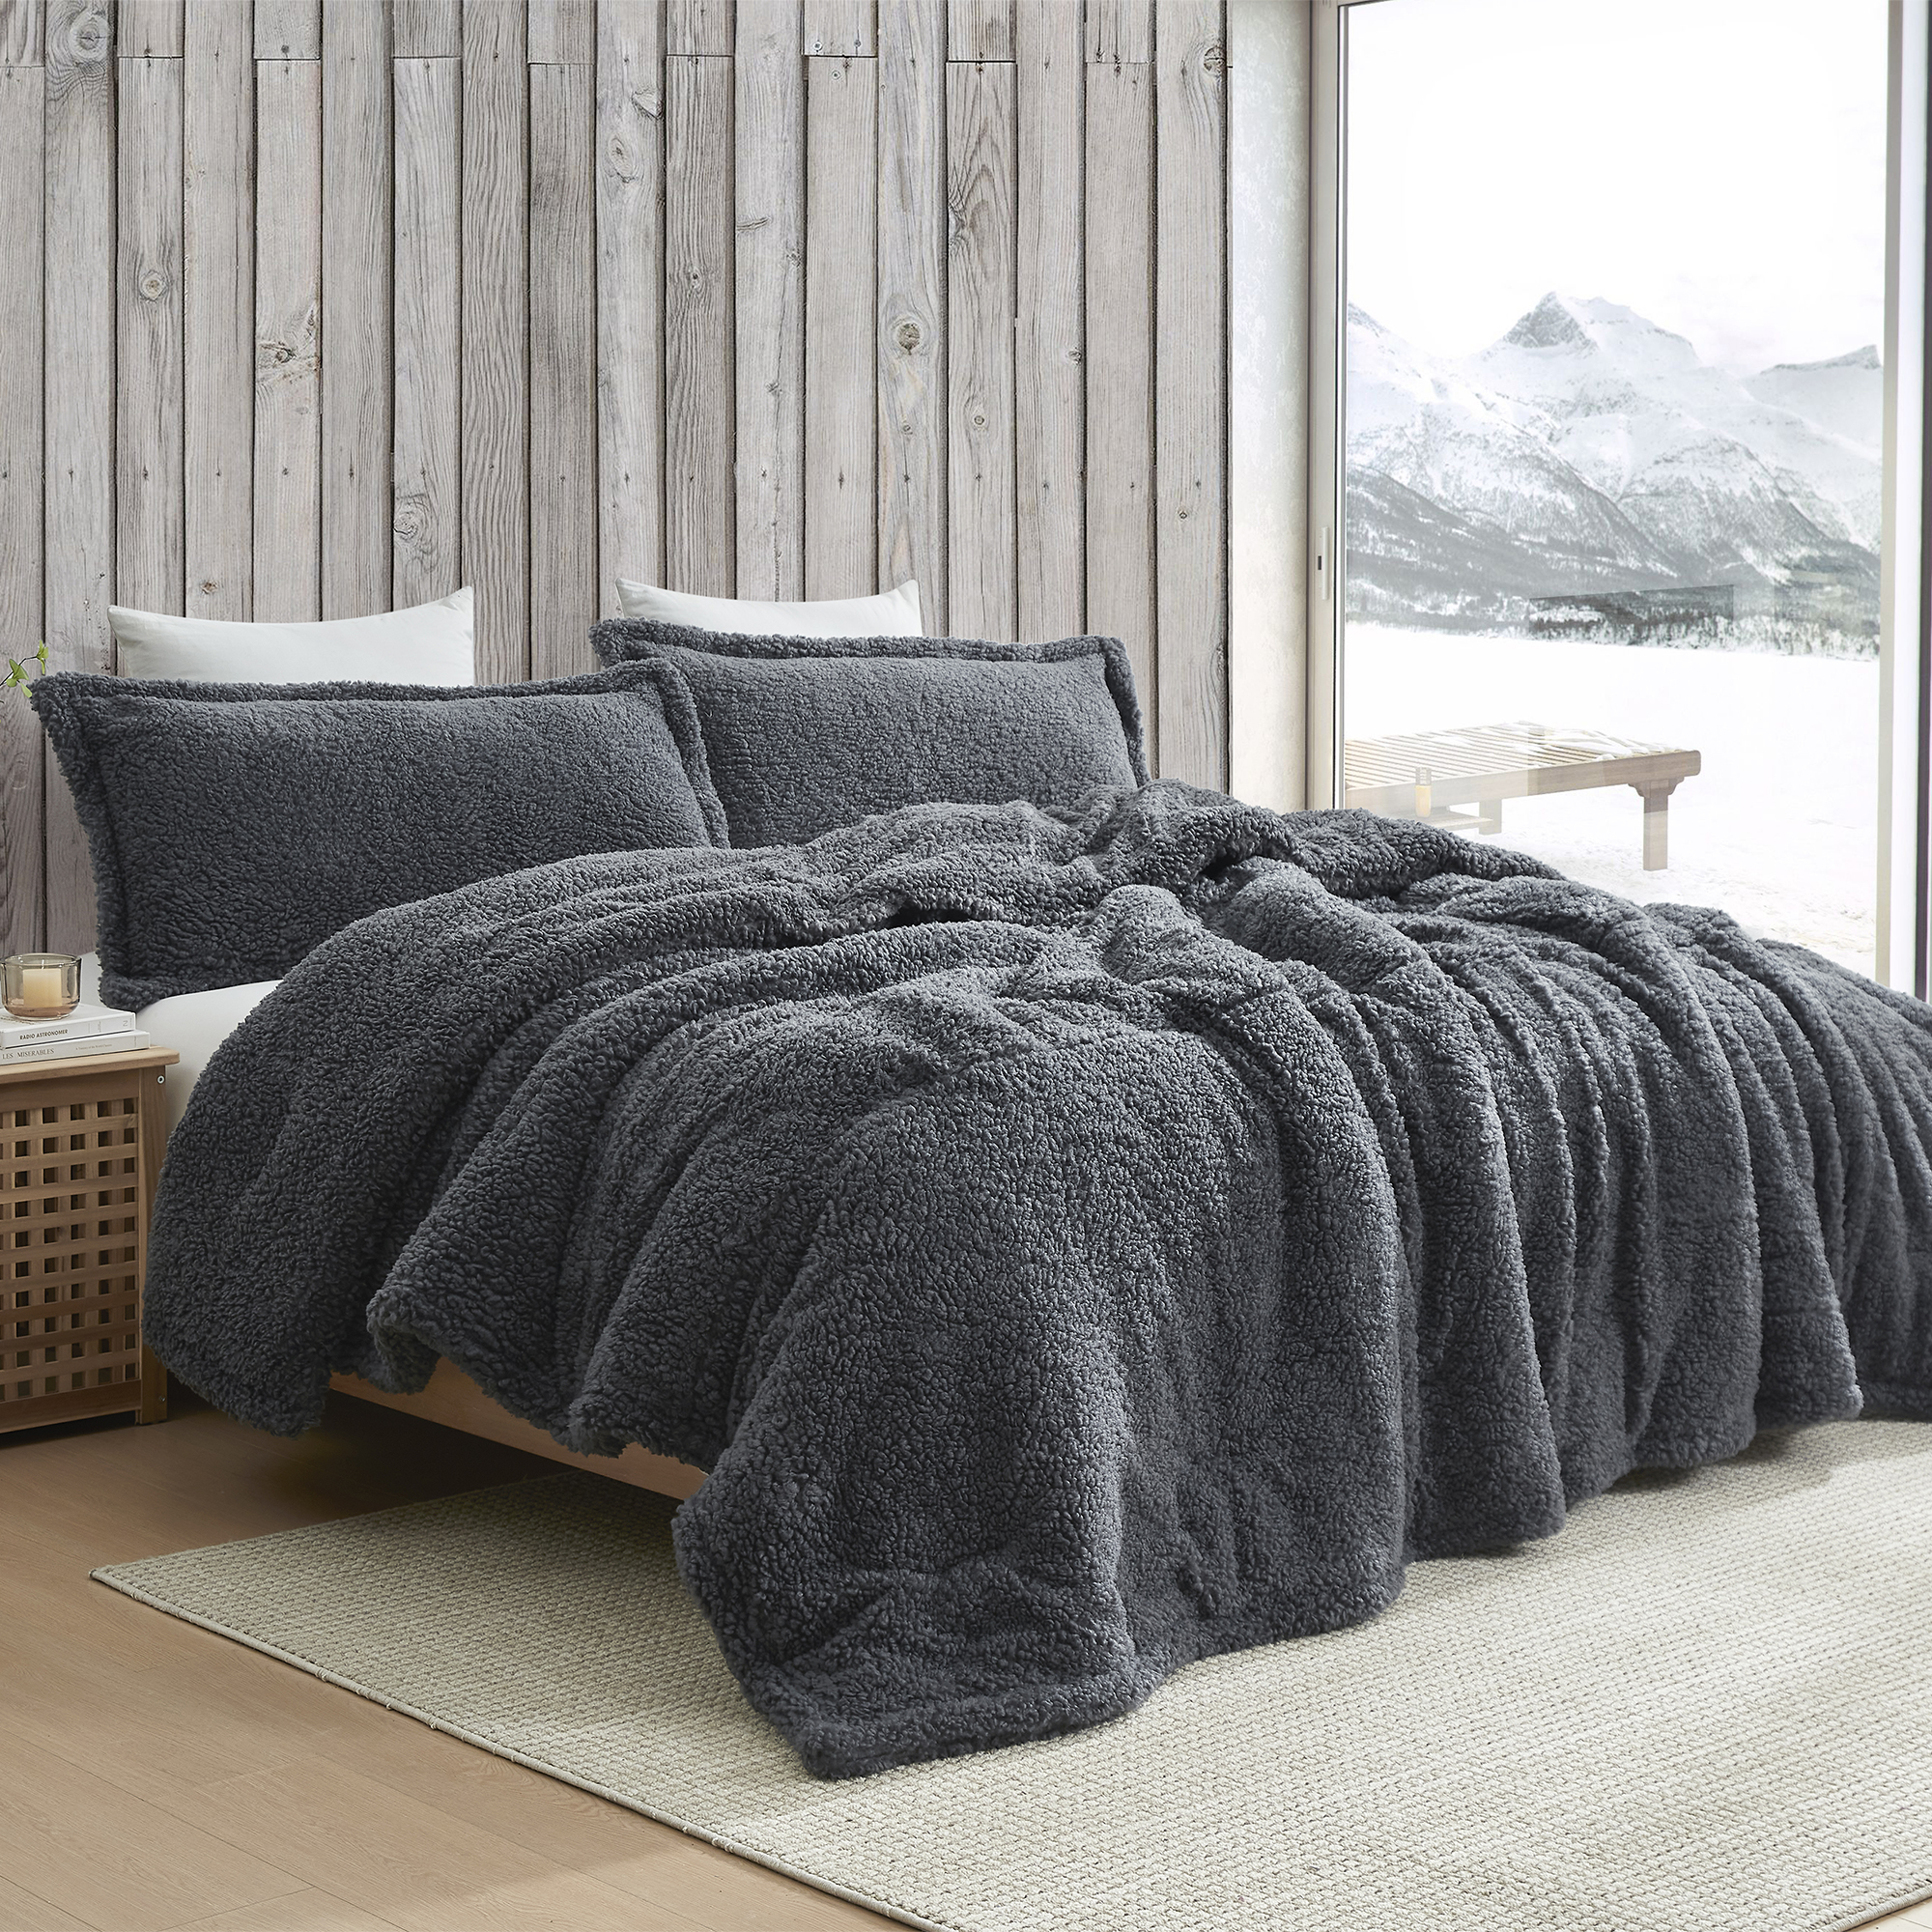 Unfluffin Believable - Coma Inducer® Oversized King Comforter - Dark Gray